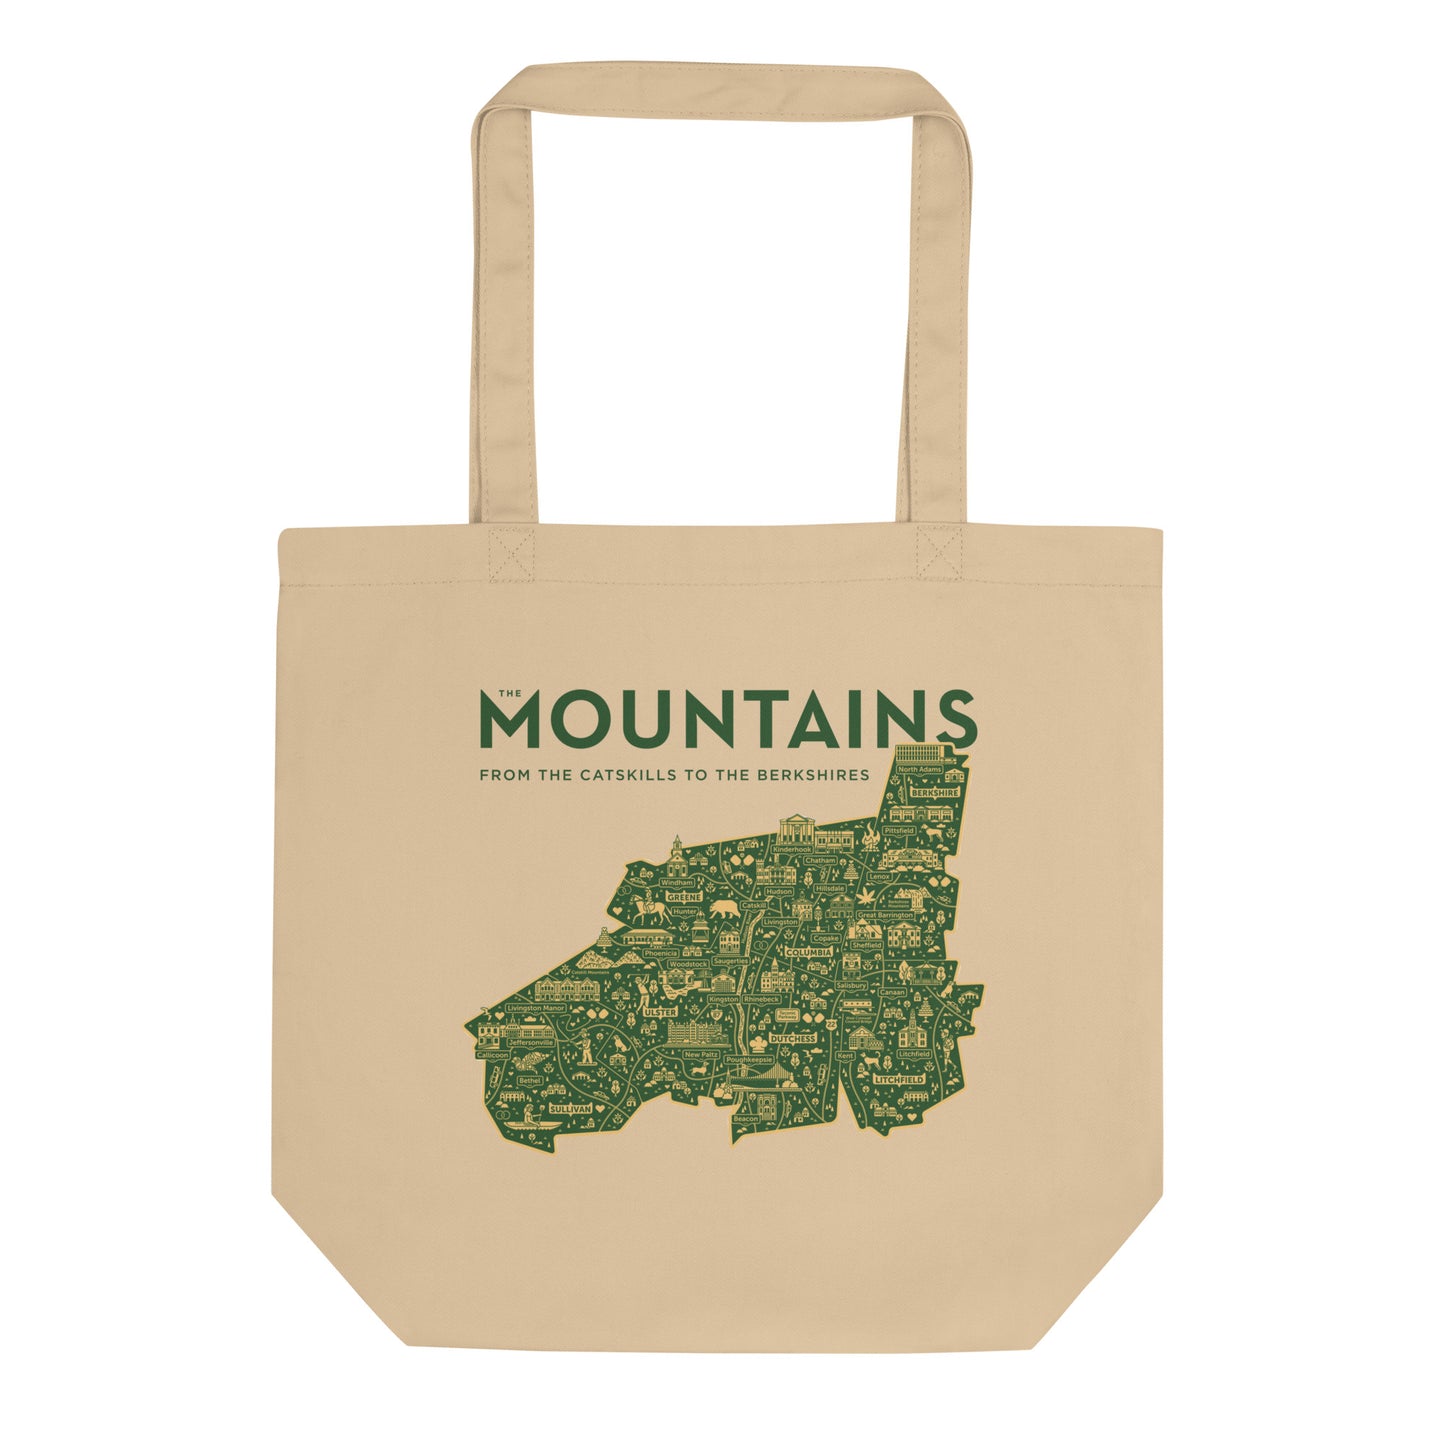 The Mountains Tote Bag